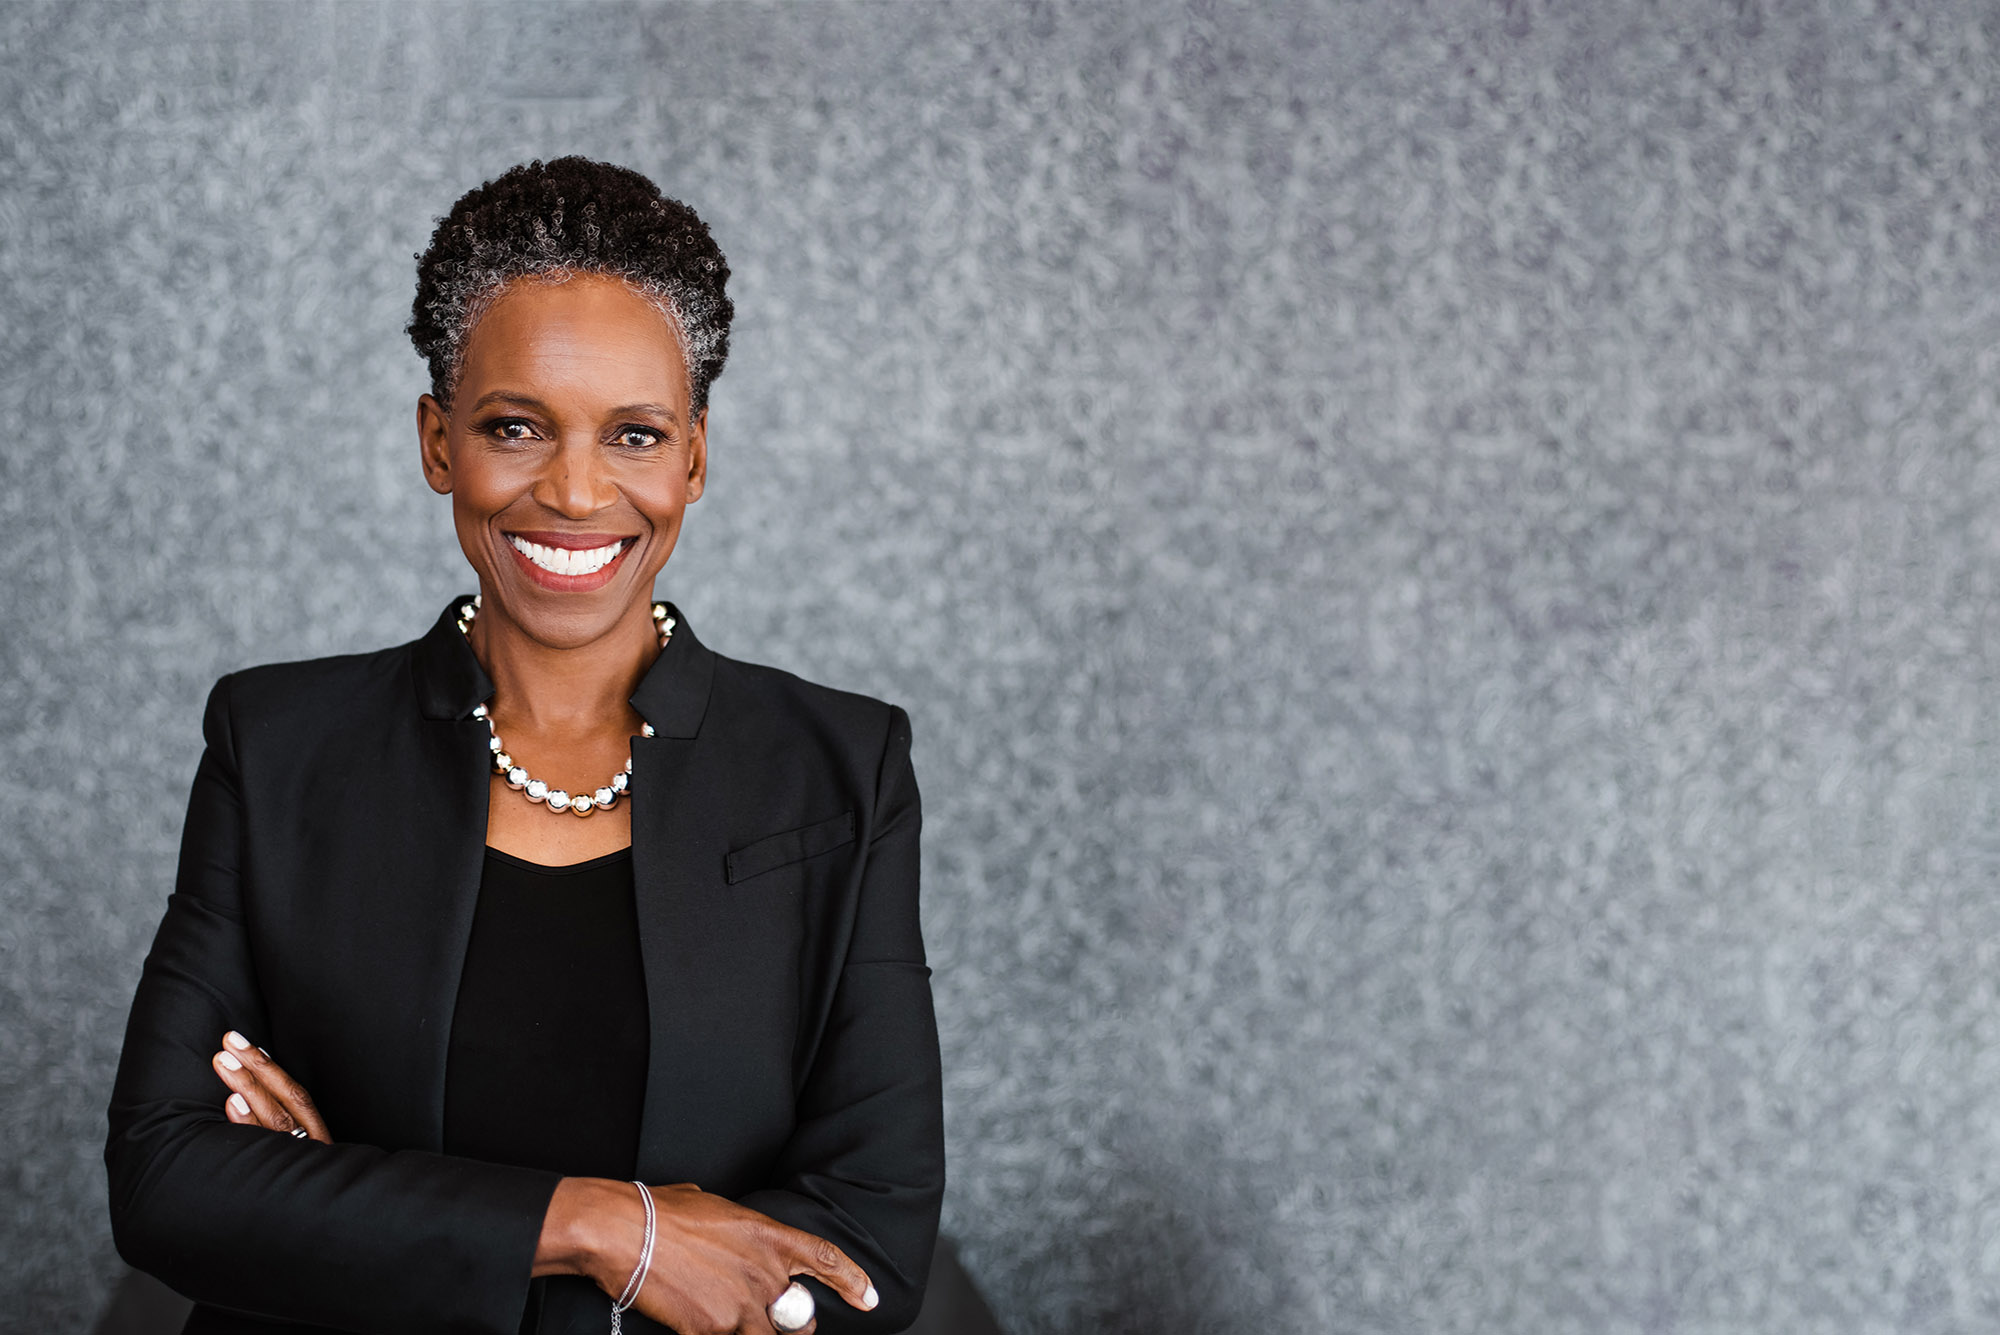 Photo: A Black woman with a short grey and black afro and wearing a necklace of large, faux metal pearls, black blouse, and black blazer, smiles and poses with arms crossed in front of a grey backdrop.